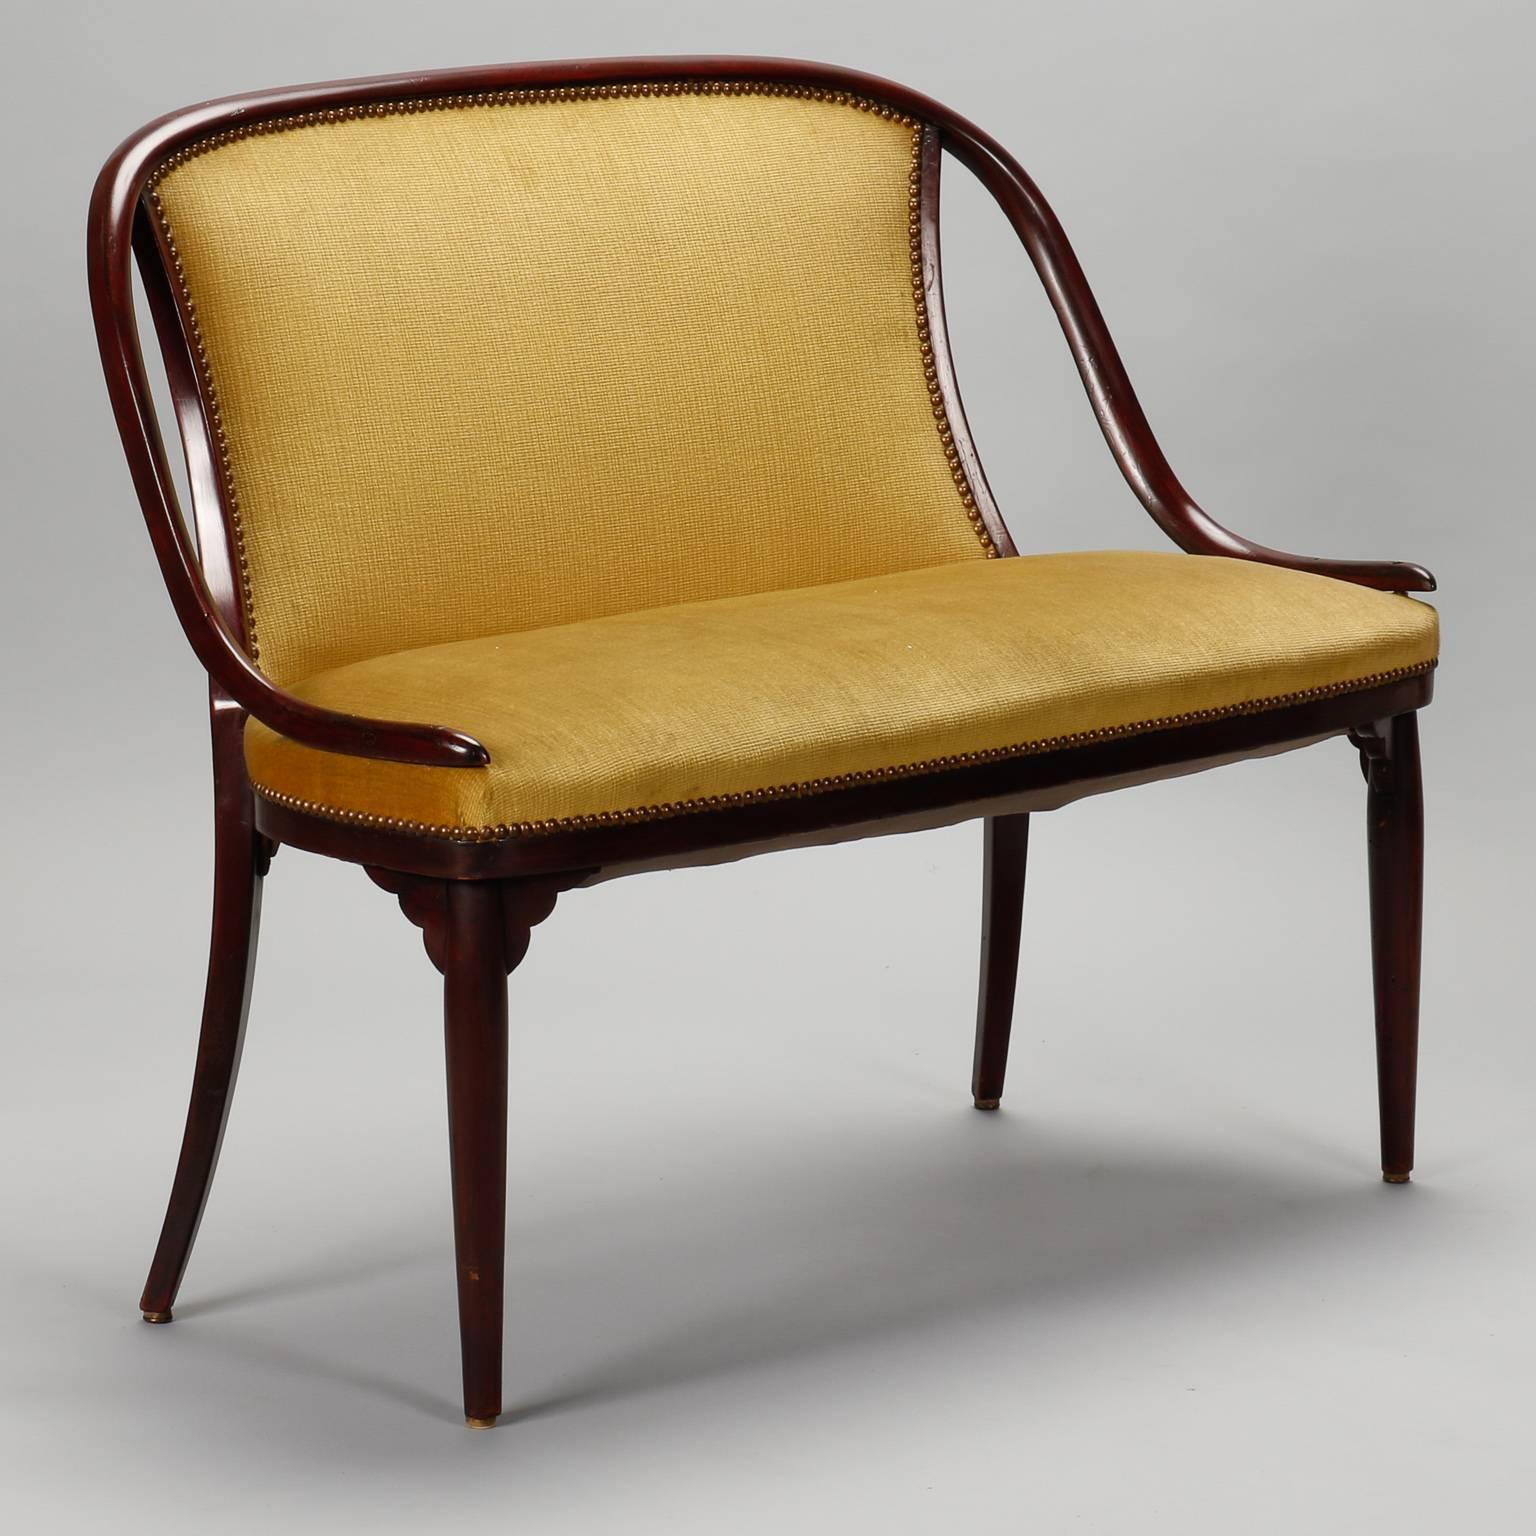 20th Century Thonet Settee with Mustard Color Fabric